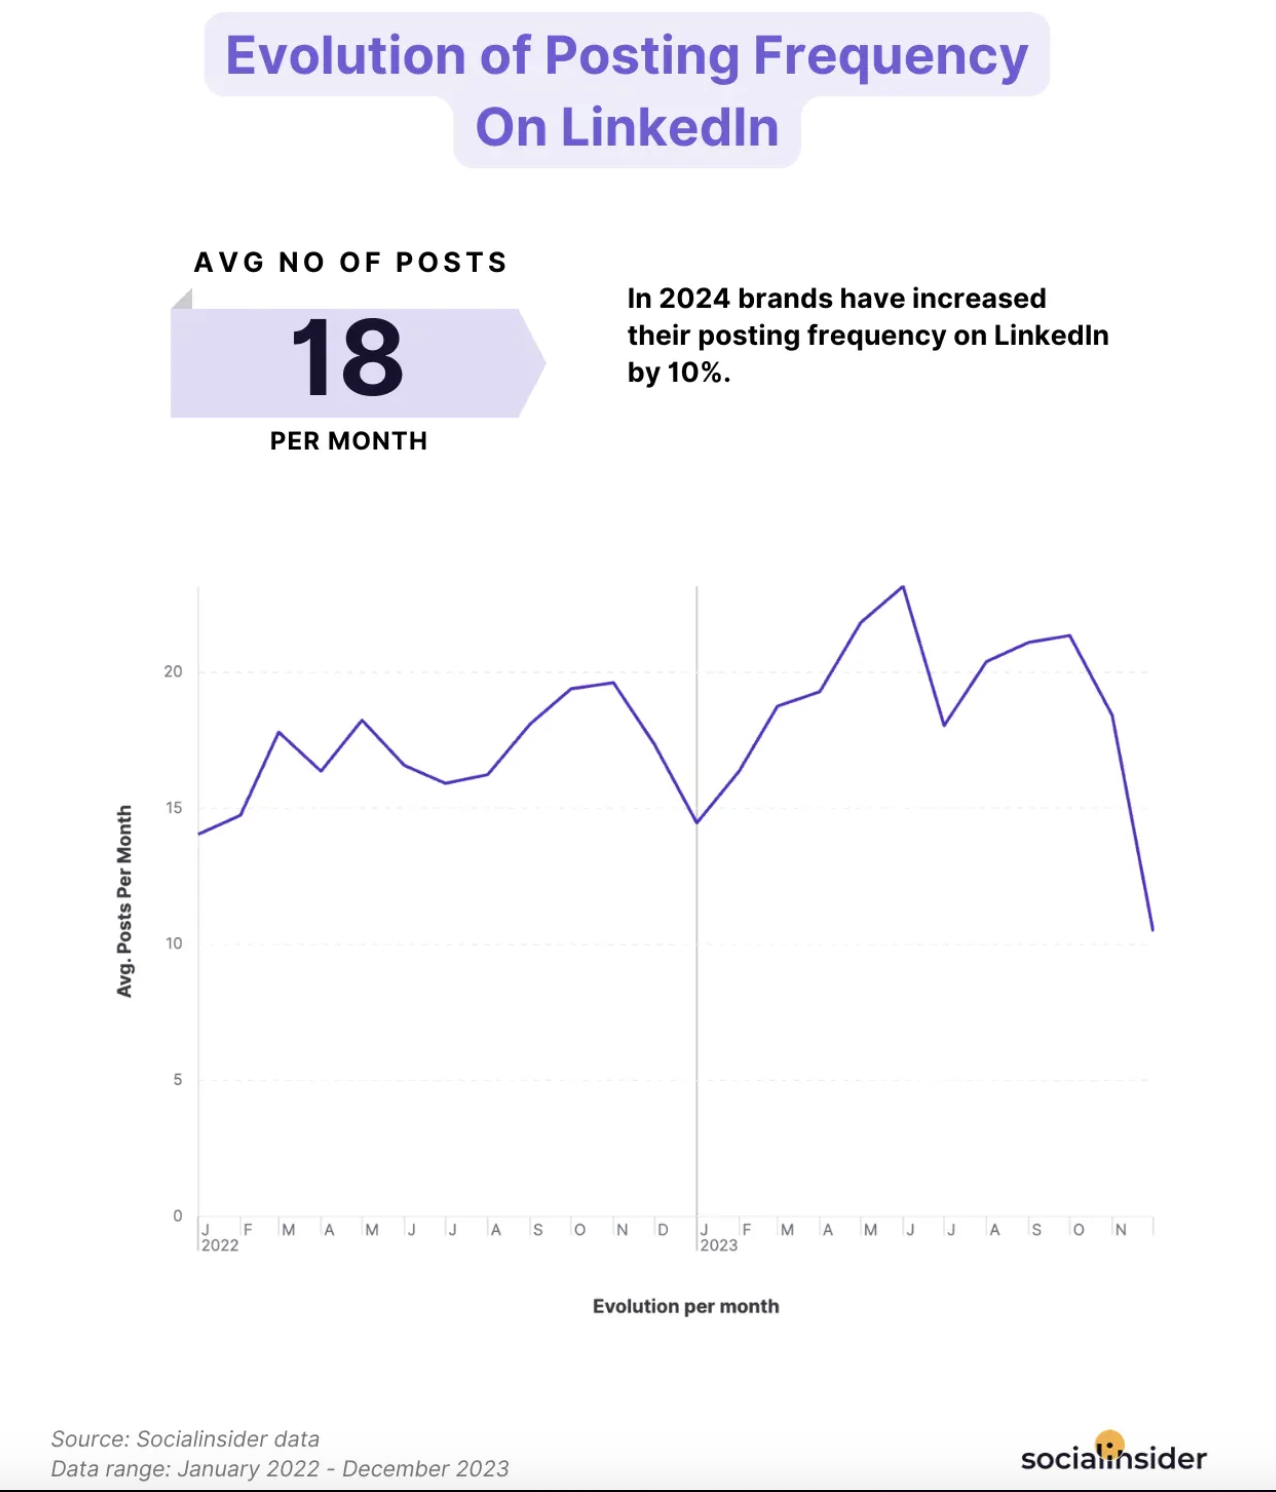 linkedin-evolution-posting-frequency-successful.png